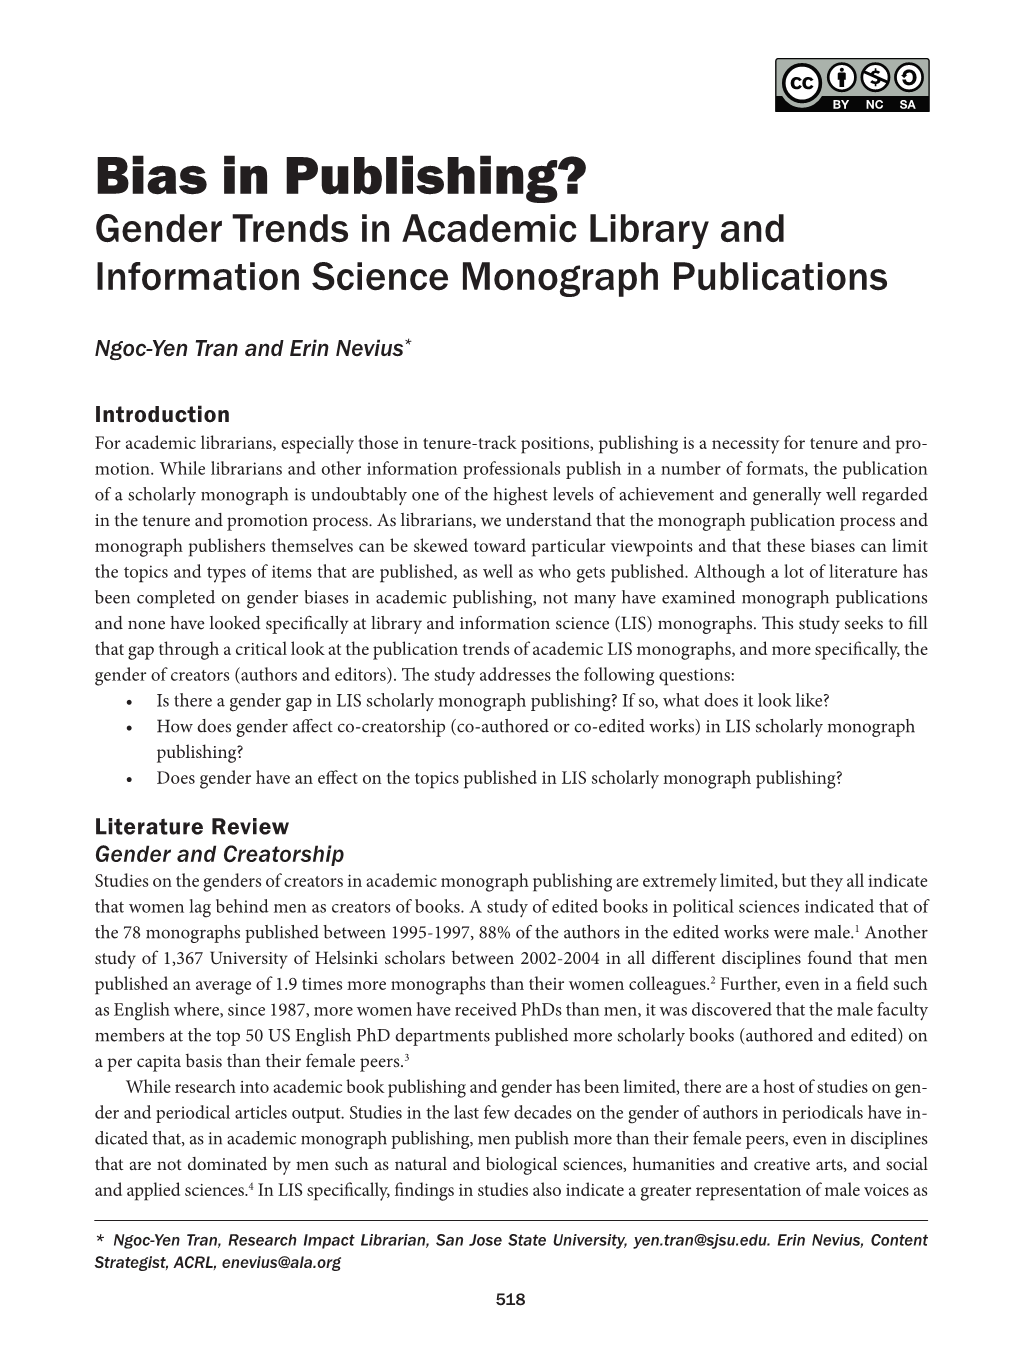 Bias in Publishing? Gender Trends in Academic Library and Information Science Monograph Publications